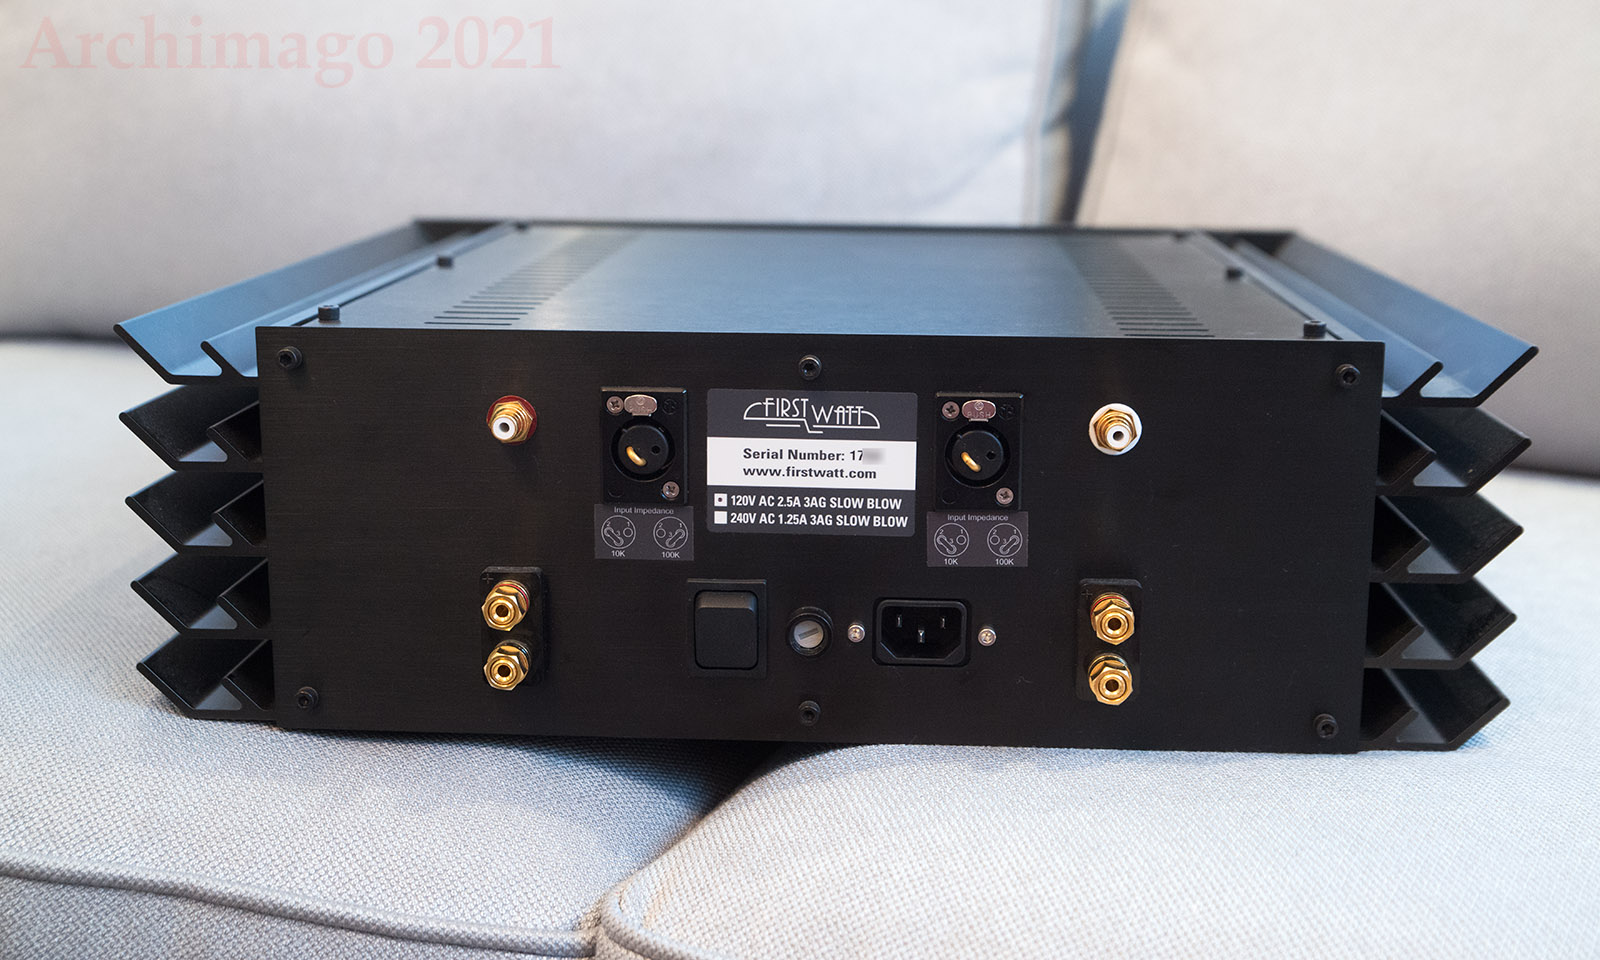 Fosi Audio V3 Two-Channel Integrated Amplifier - A Blogs & Little Things  Review 